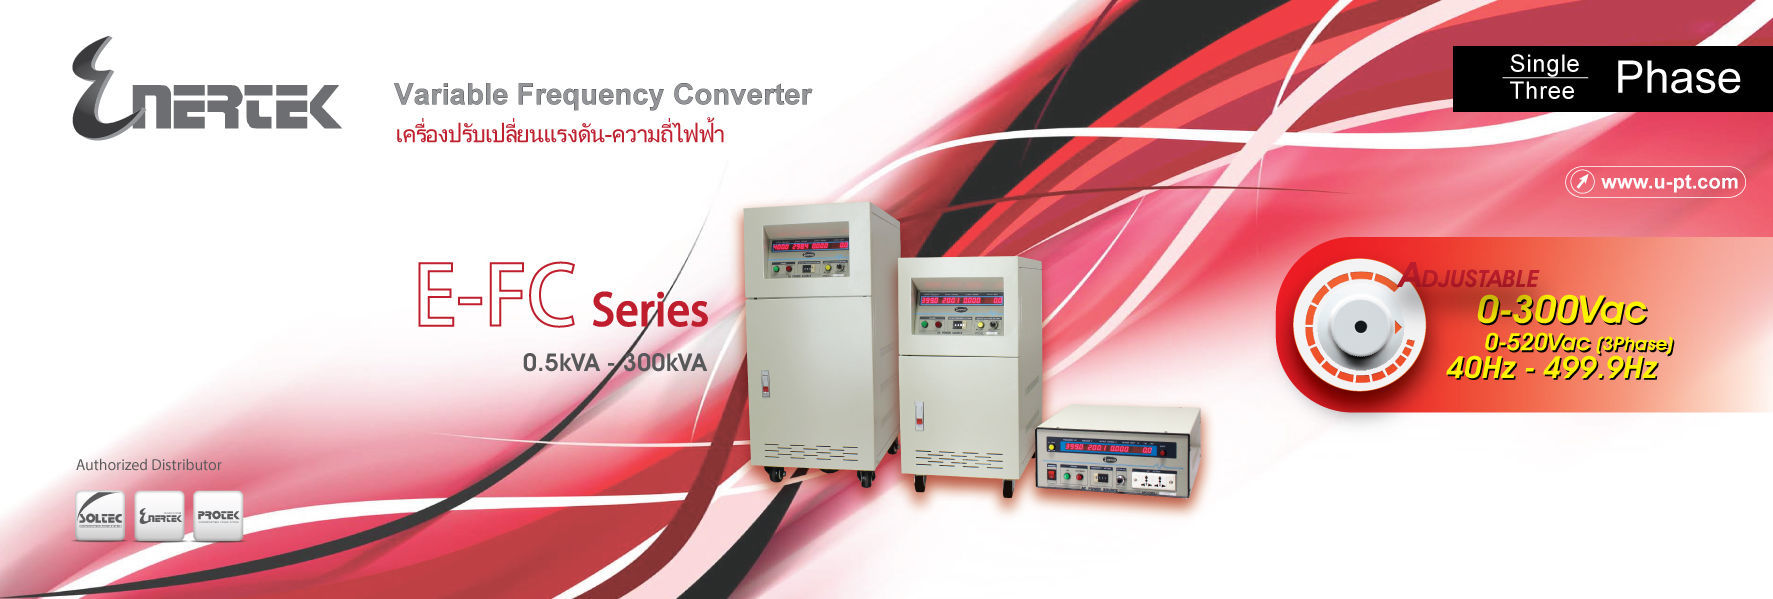 Frequency Converter E-FC Series